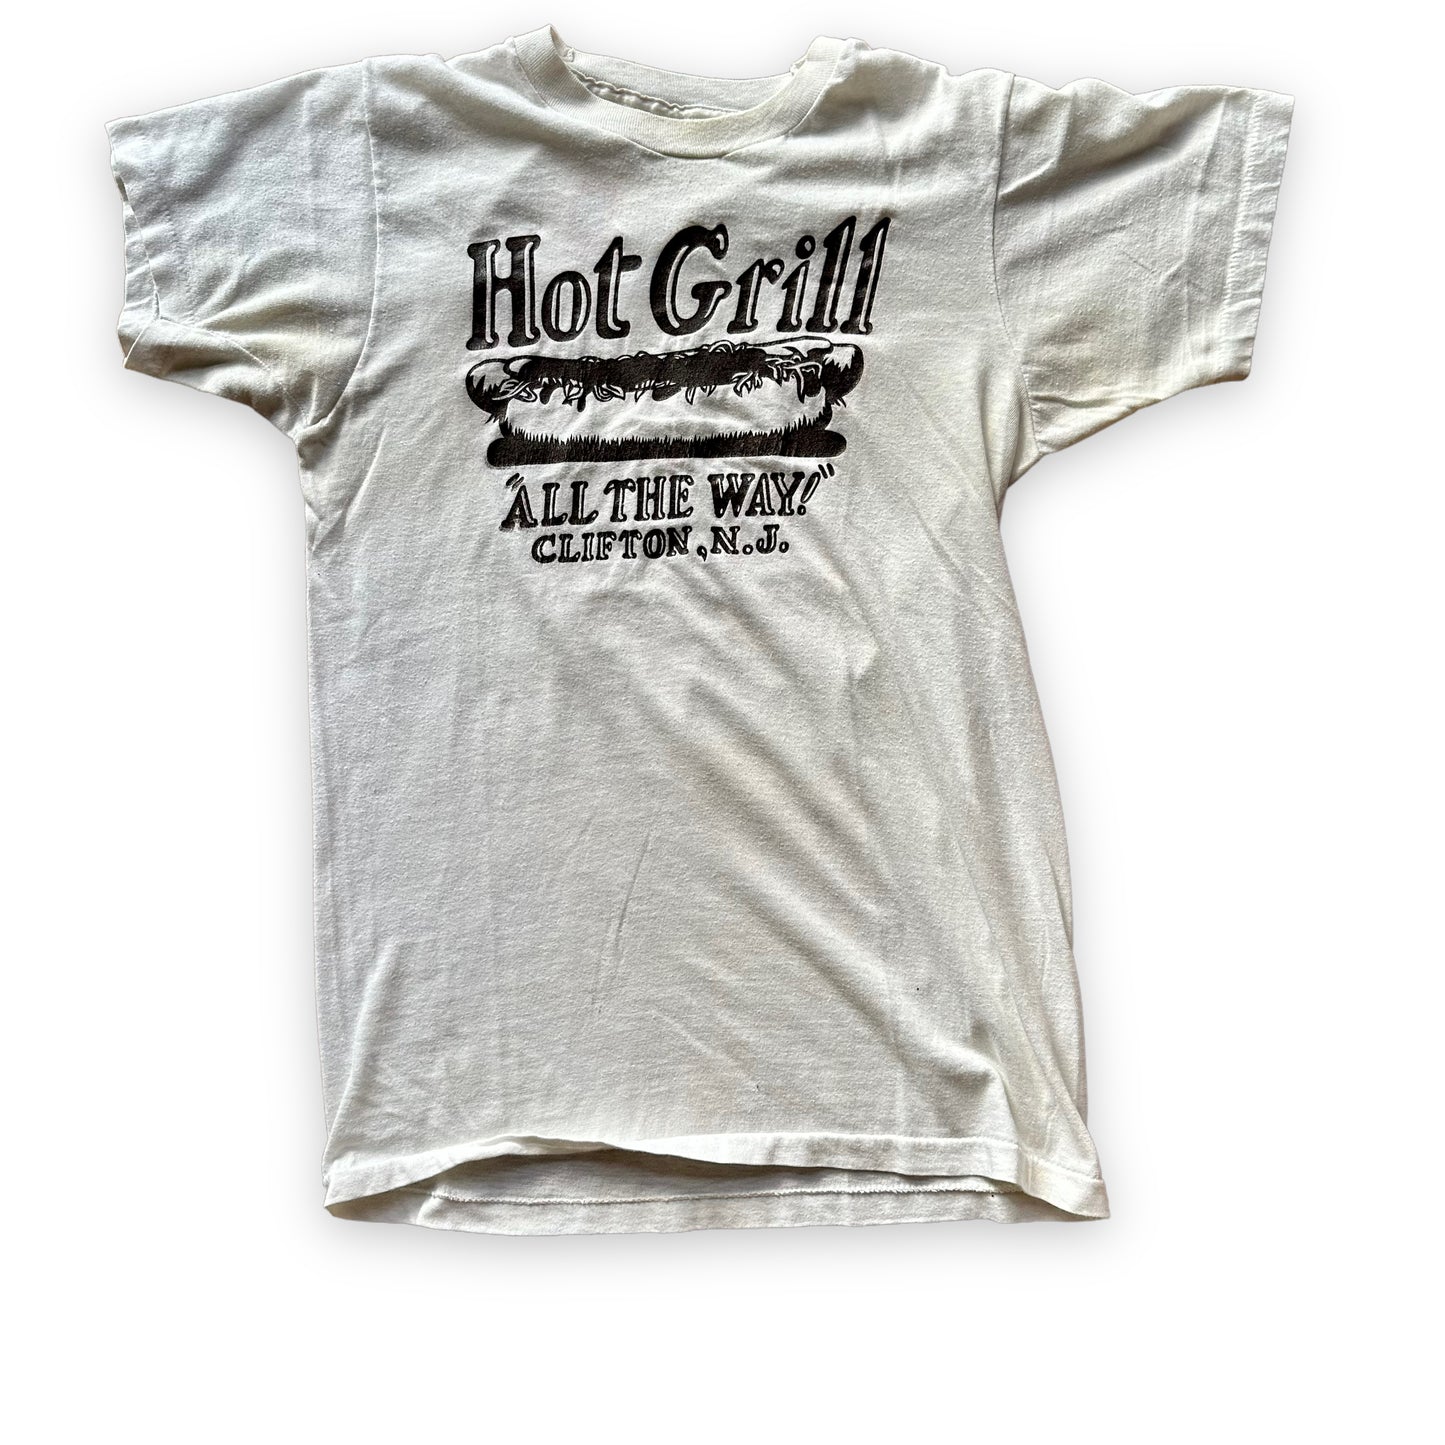 Front View of Vintage Hot Grill "All The Way" Clifton NJ Hot Dog Tee SZ M |  Vintage Single Stitch T-Shirt | Barn Owl Vintage Seattle